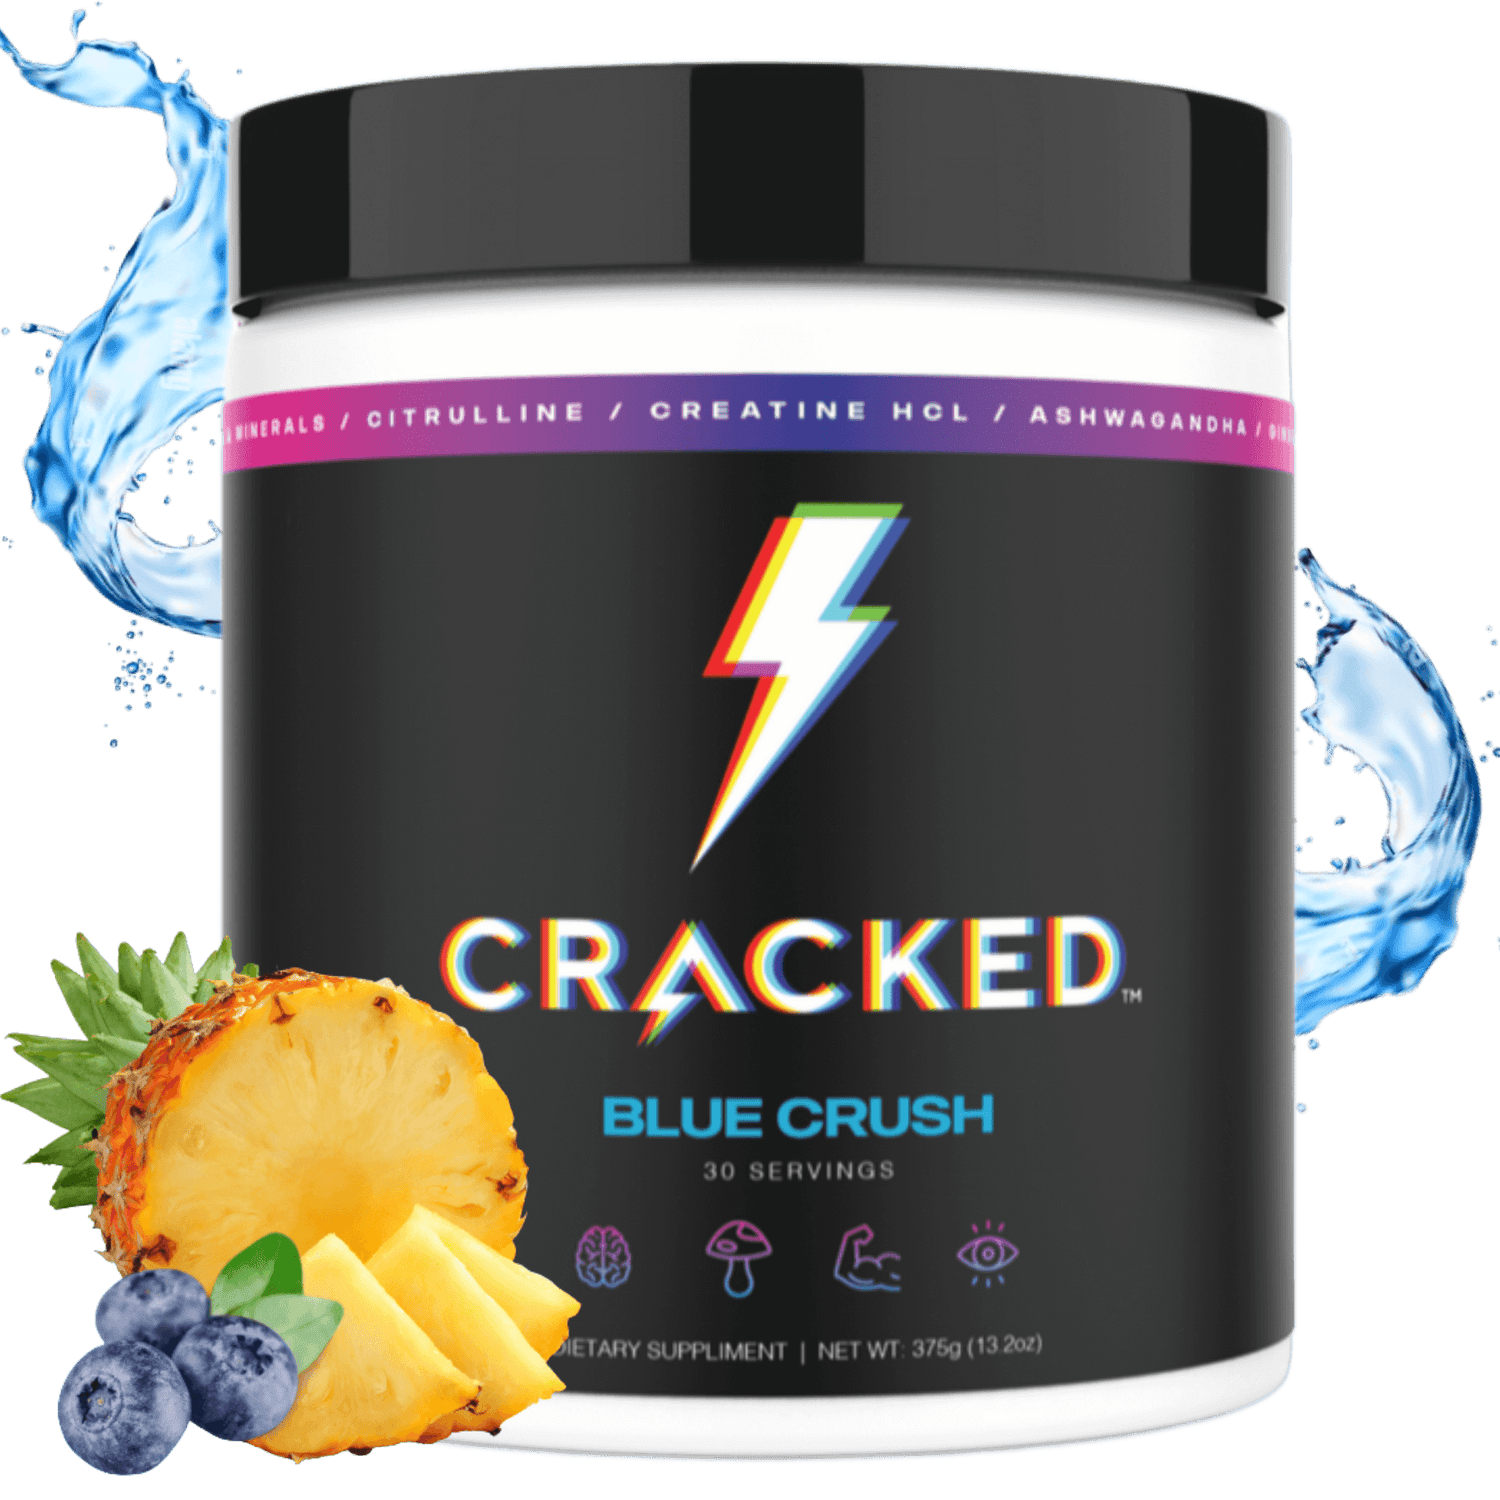 Healthy Pre Workout Powder - Cracked Supplements For Clean Energy